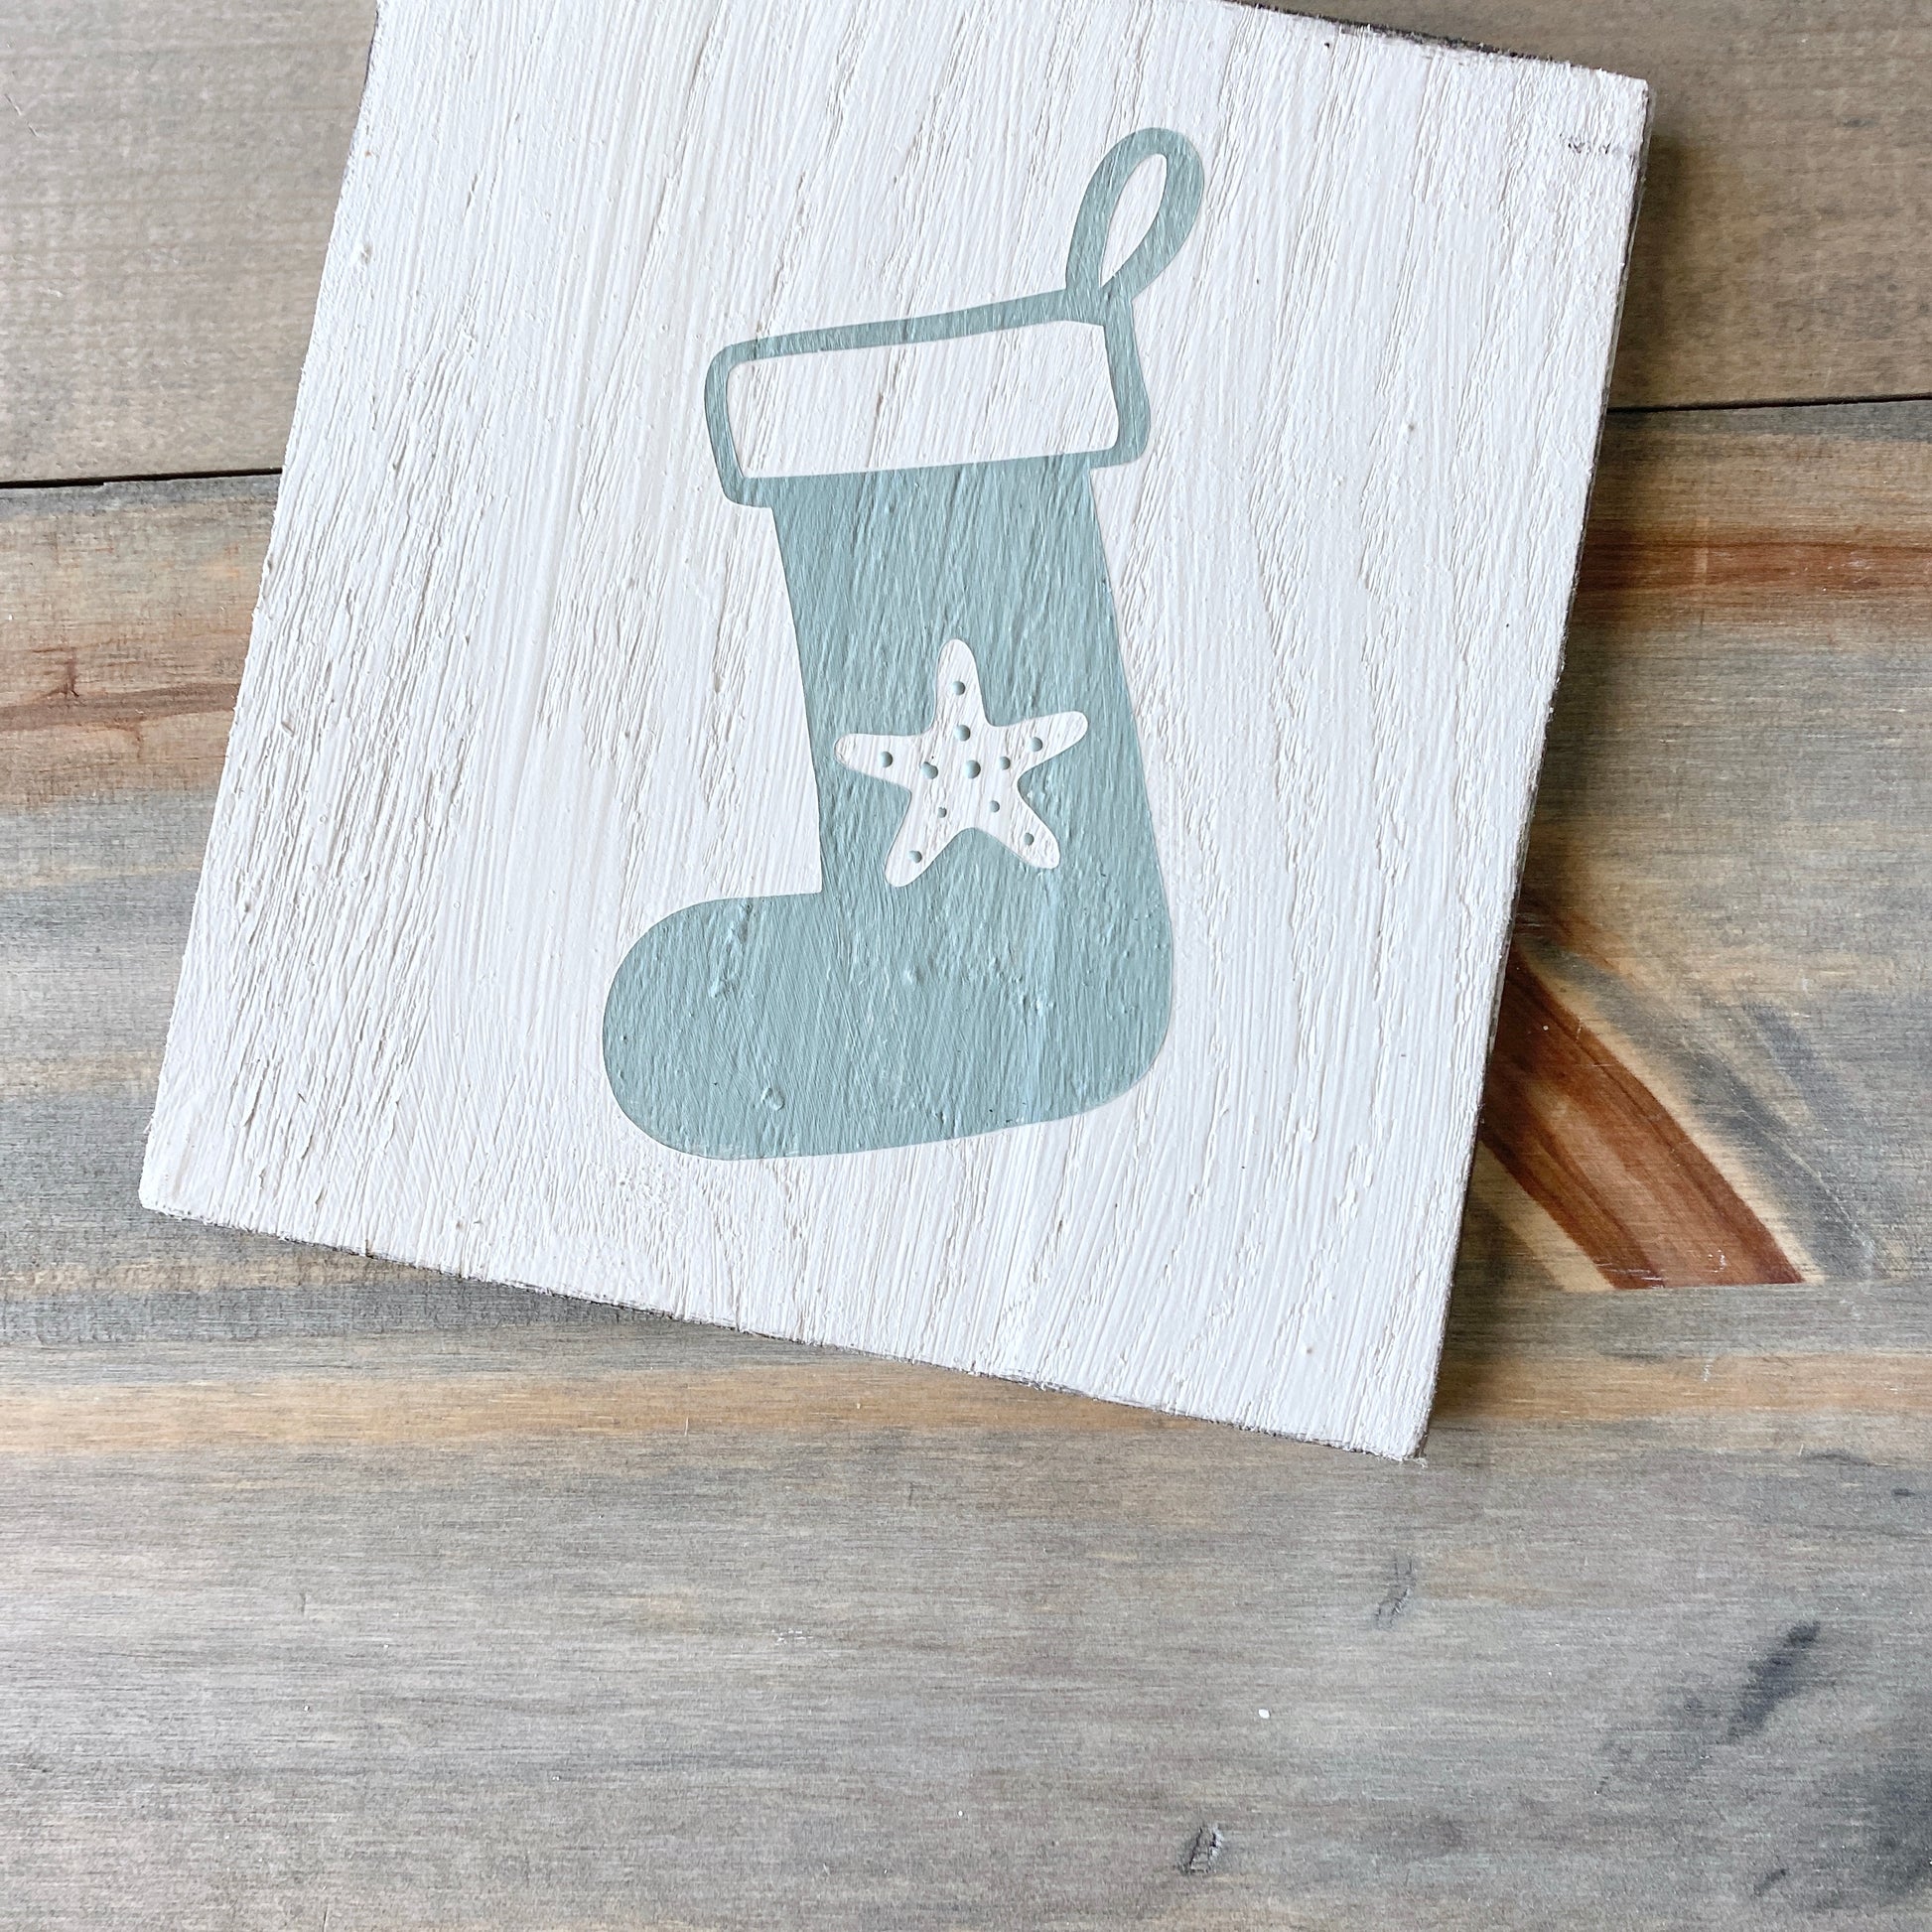 Coastal Christmas decor, Anchored Soul Designs starfish stocking sign, white background with sage green design